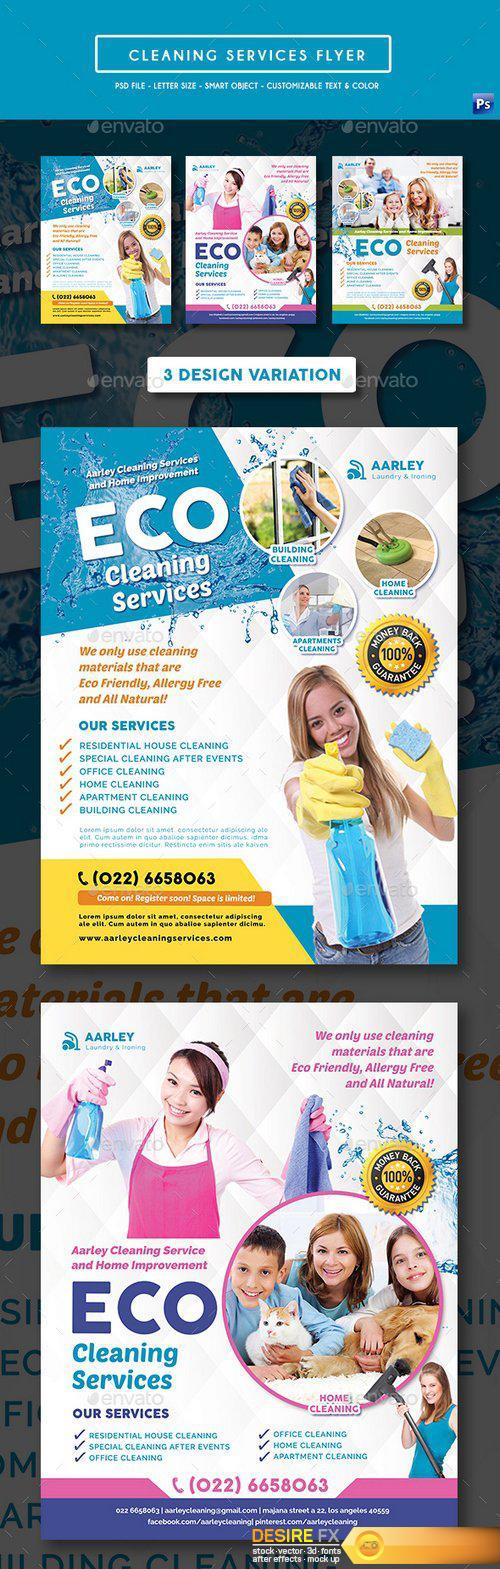 Graphicriver - Cleaning Services Flyer 19585464